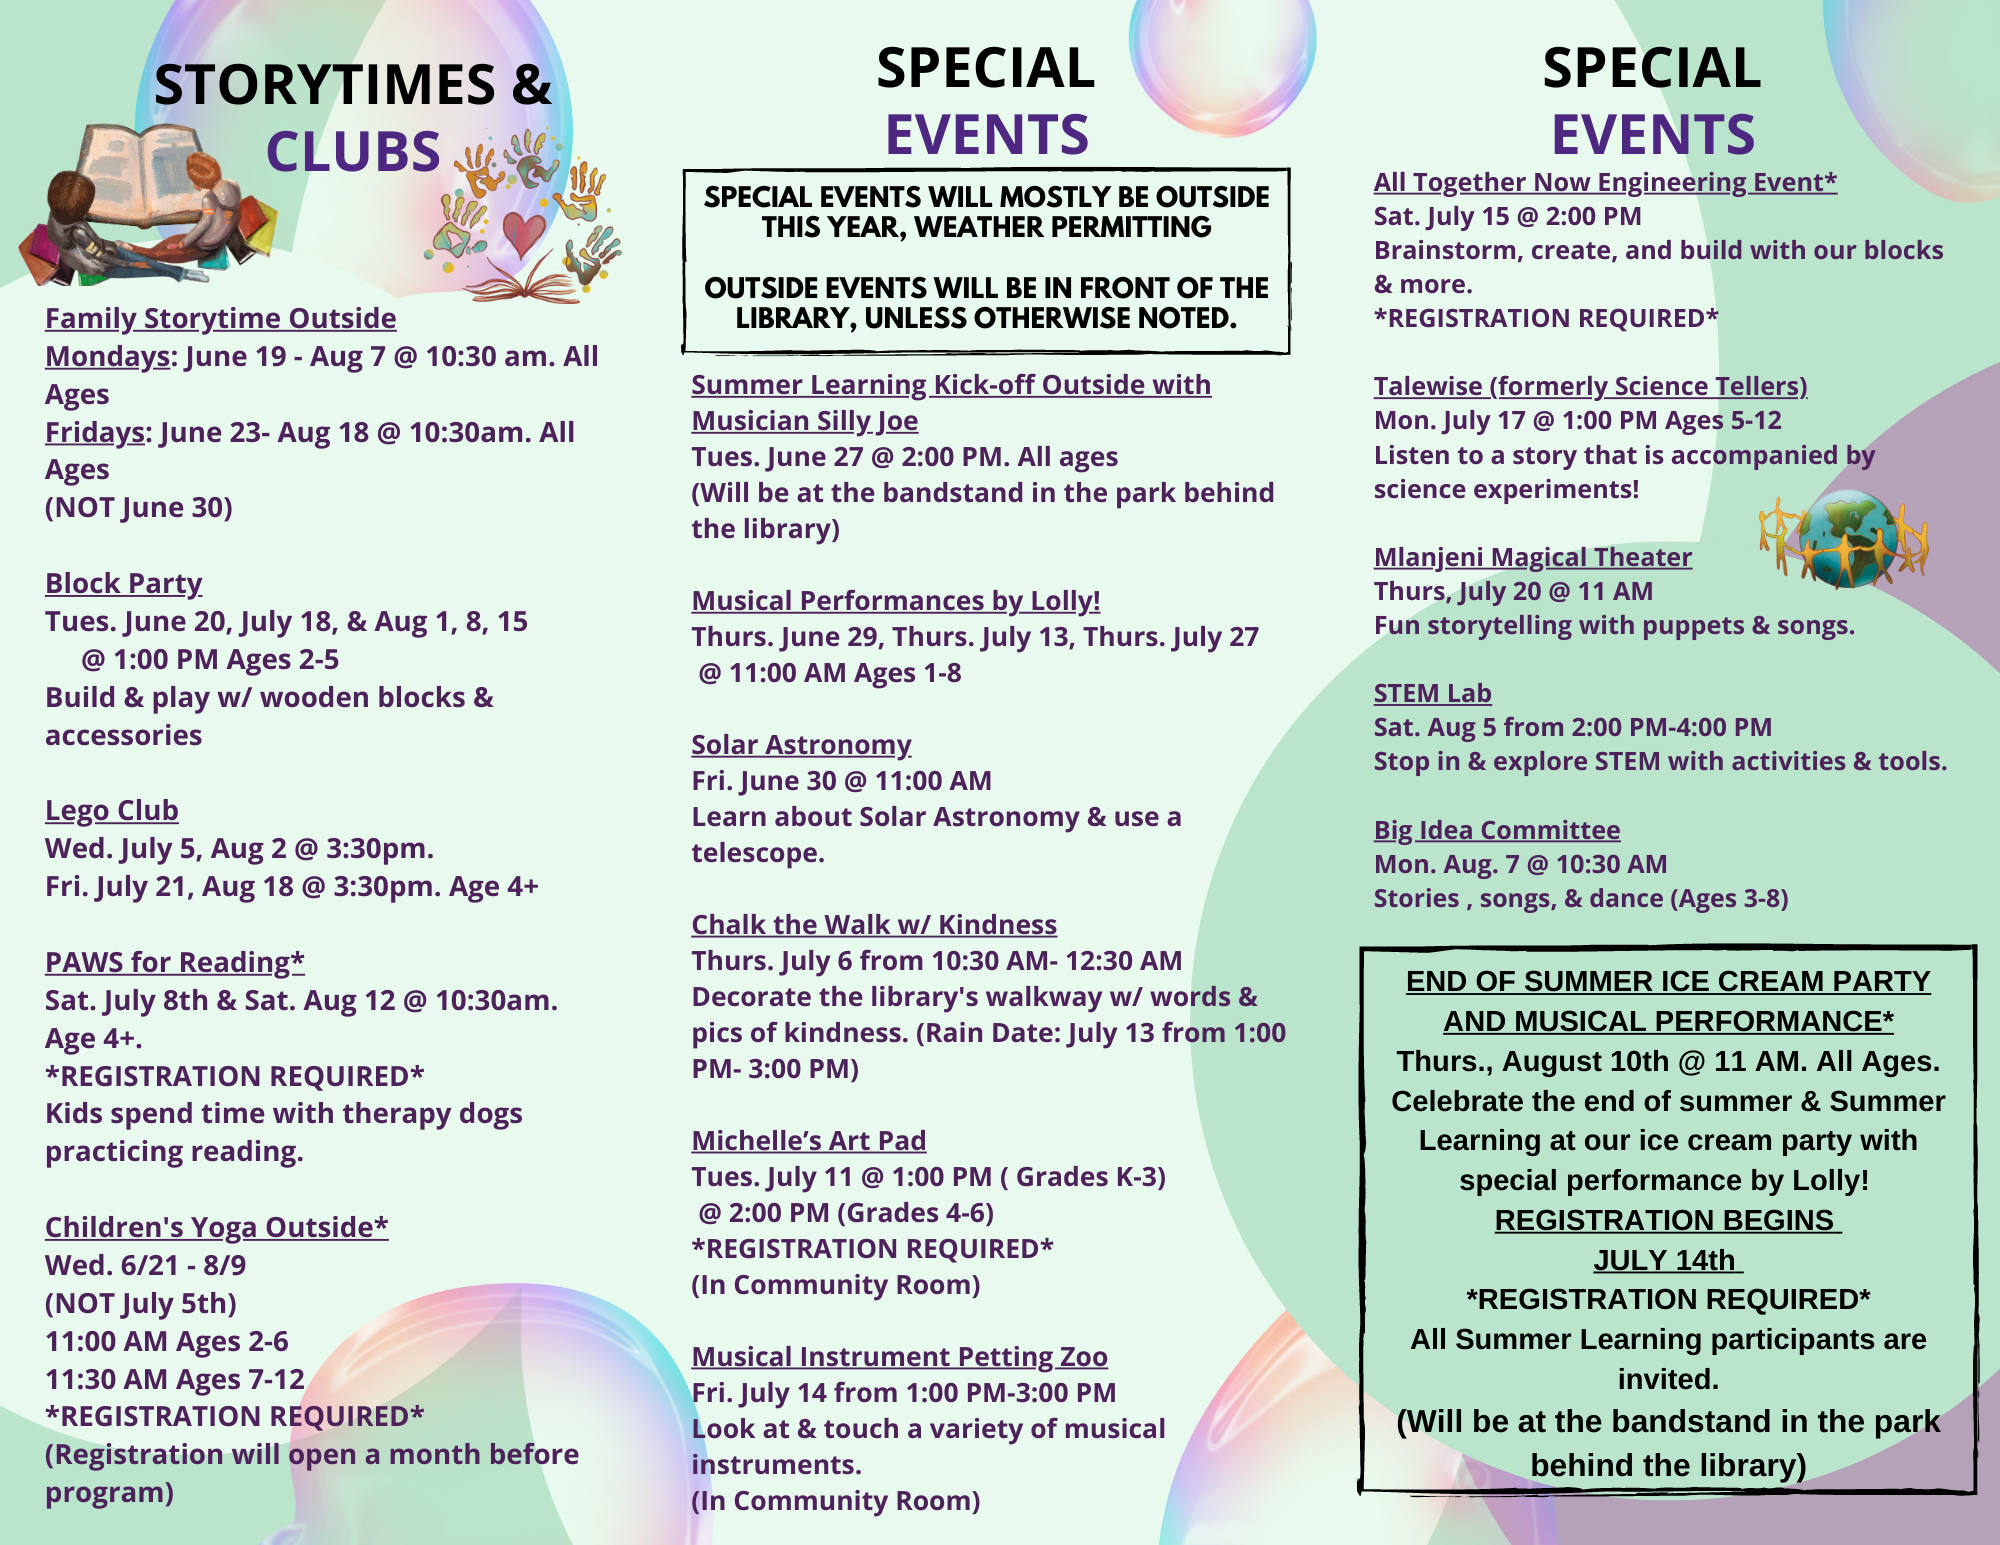 trifold brochure with all of the summer programs for kids & teens